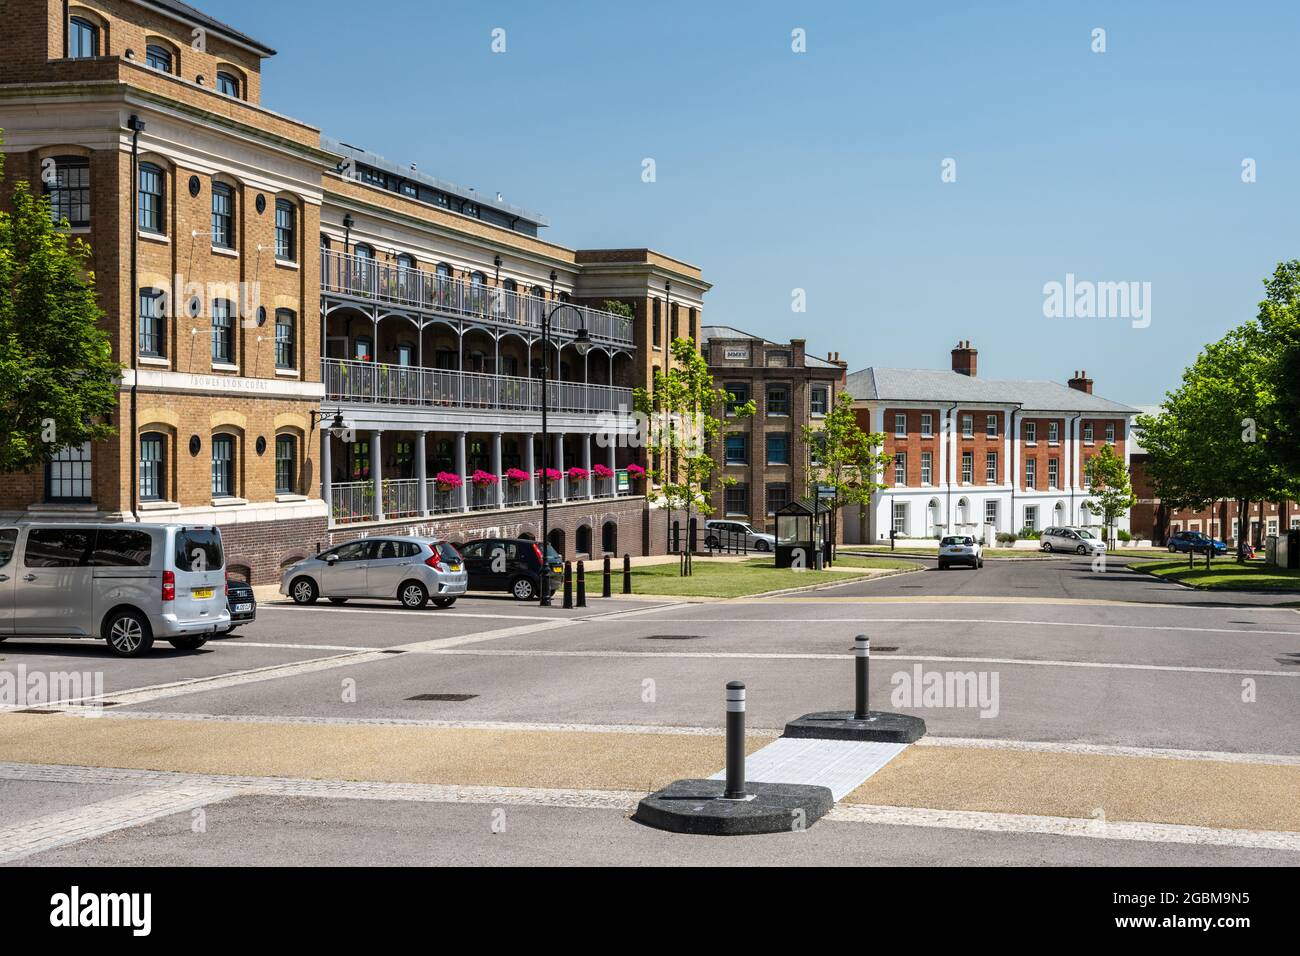 Sun shines on apartment buildings and town houses along Peverell Avenue in the centre of Poundbury new town. Stock Photo